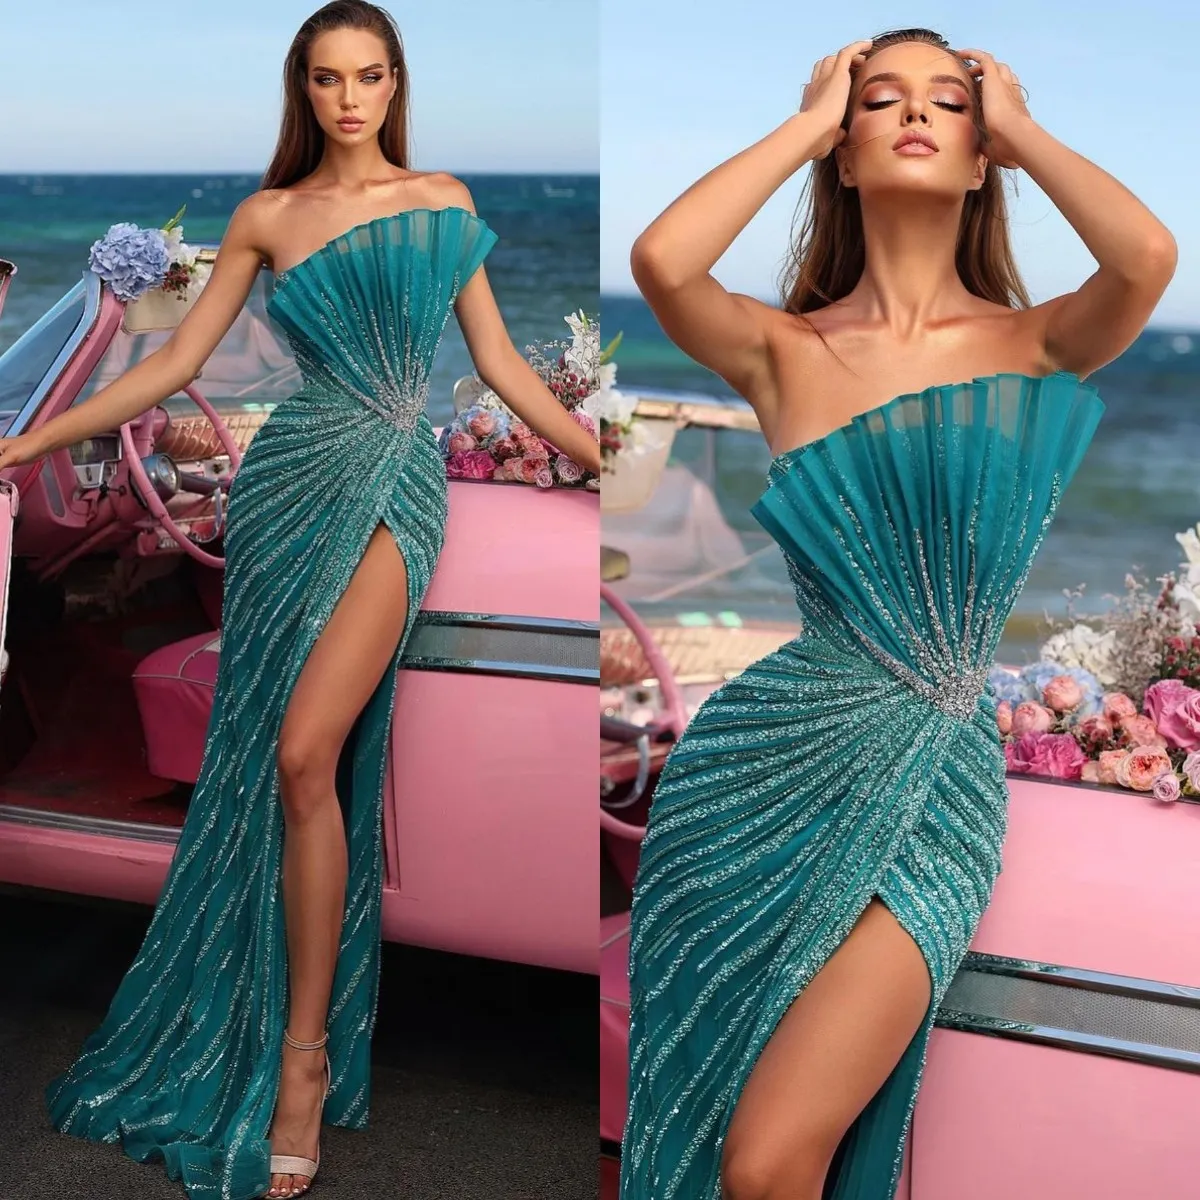 tail Blue Mermaid Evening Dresses Strapless Party Prom Split Pleats Crystal Beads Formal Long Red Carpet Dress for special ocn